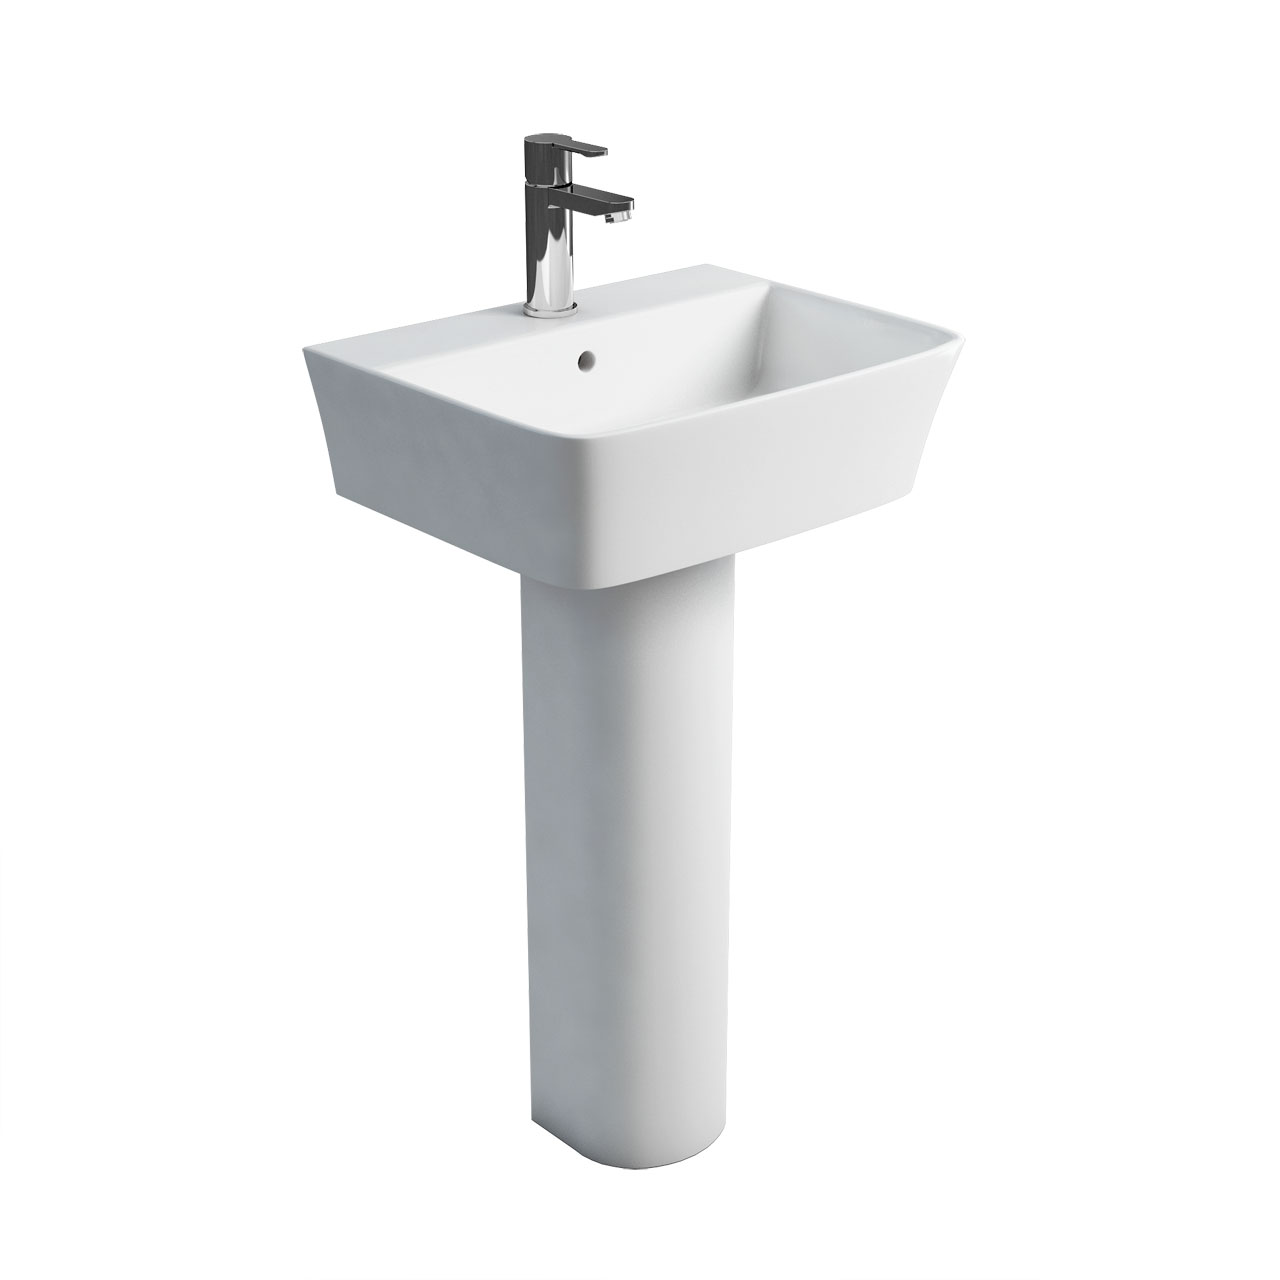 Fine S40 500 basin and round fronted pedestal